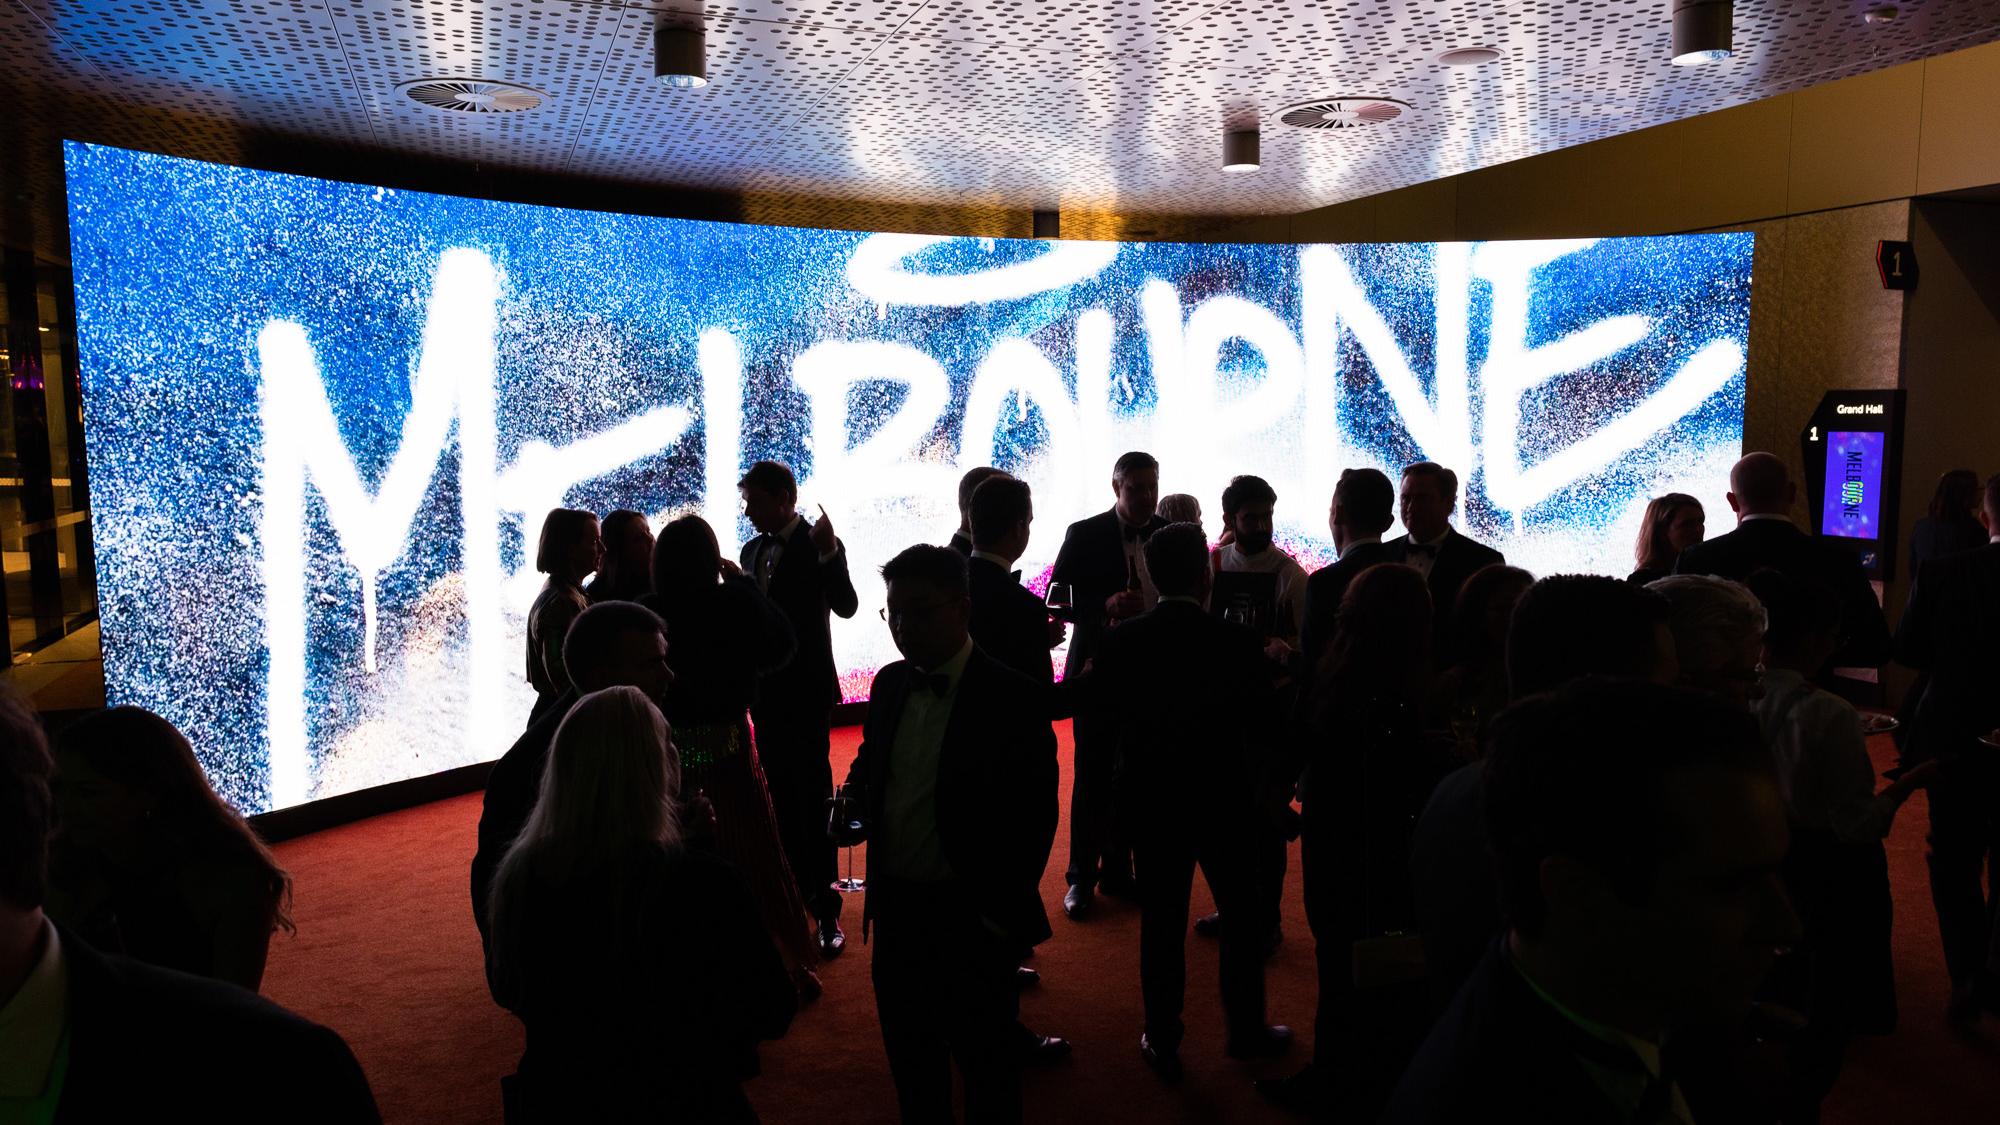 Raising the bar: The art of visionary event production